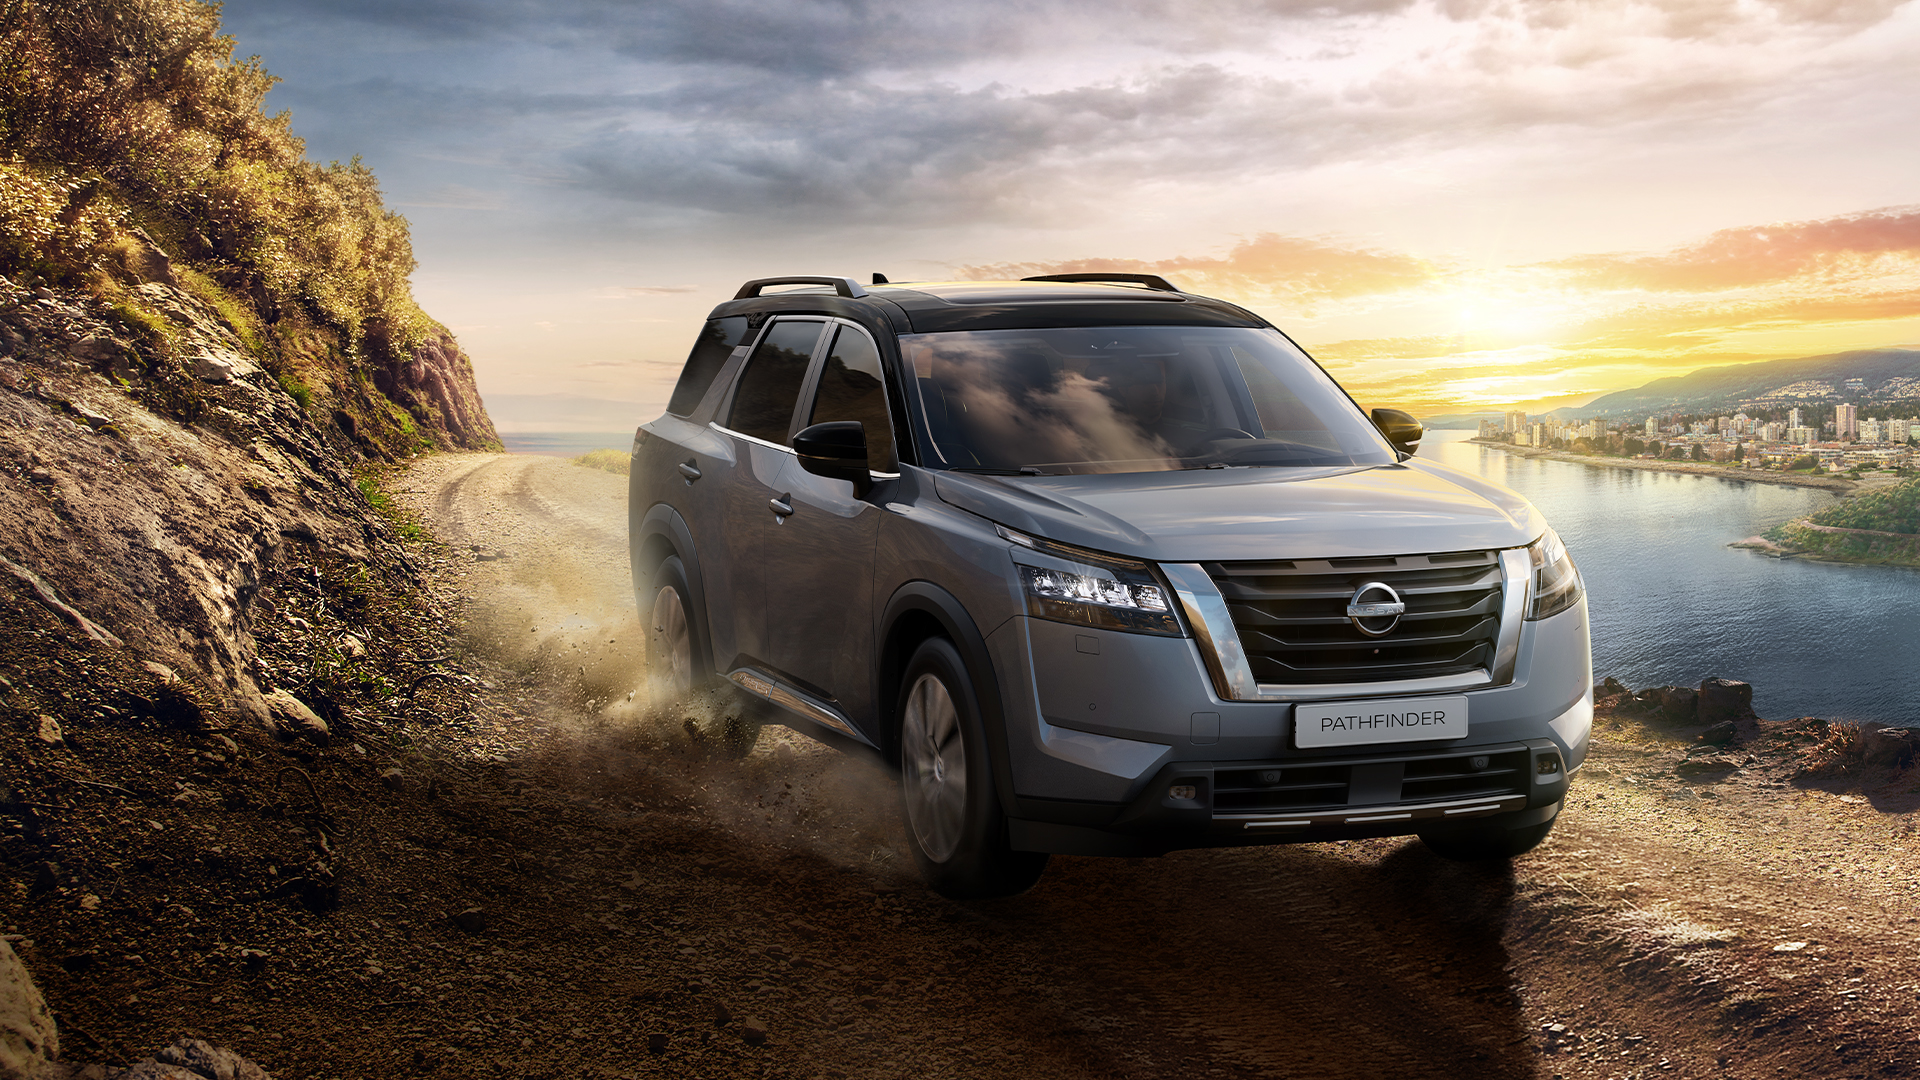 Launch of a new Nissan Pathfinder in Russia